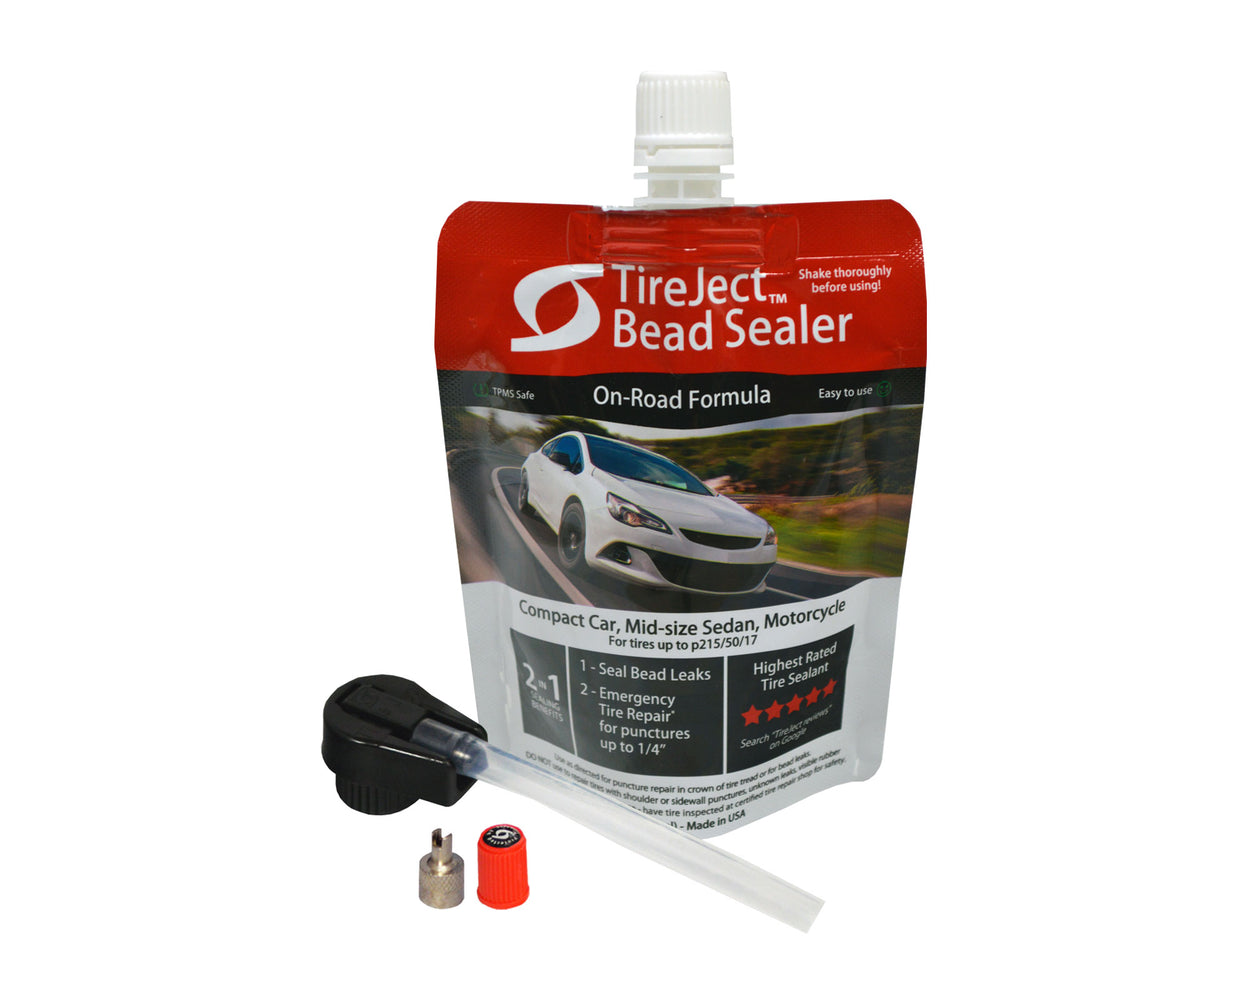 Fitter / auto mechanic applies bead sealer compound with a brush